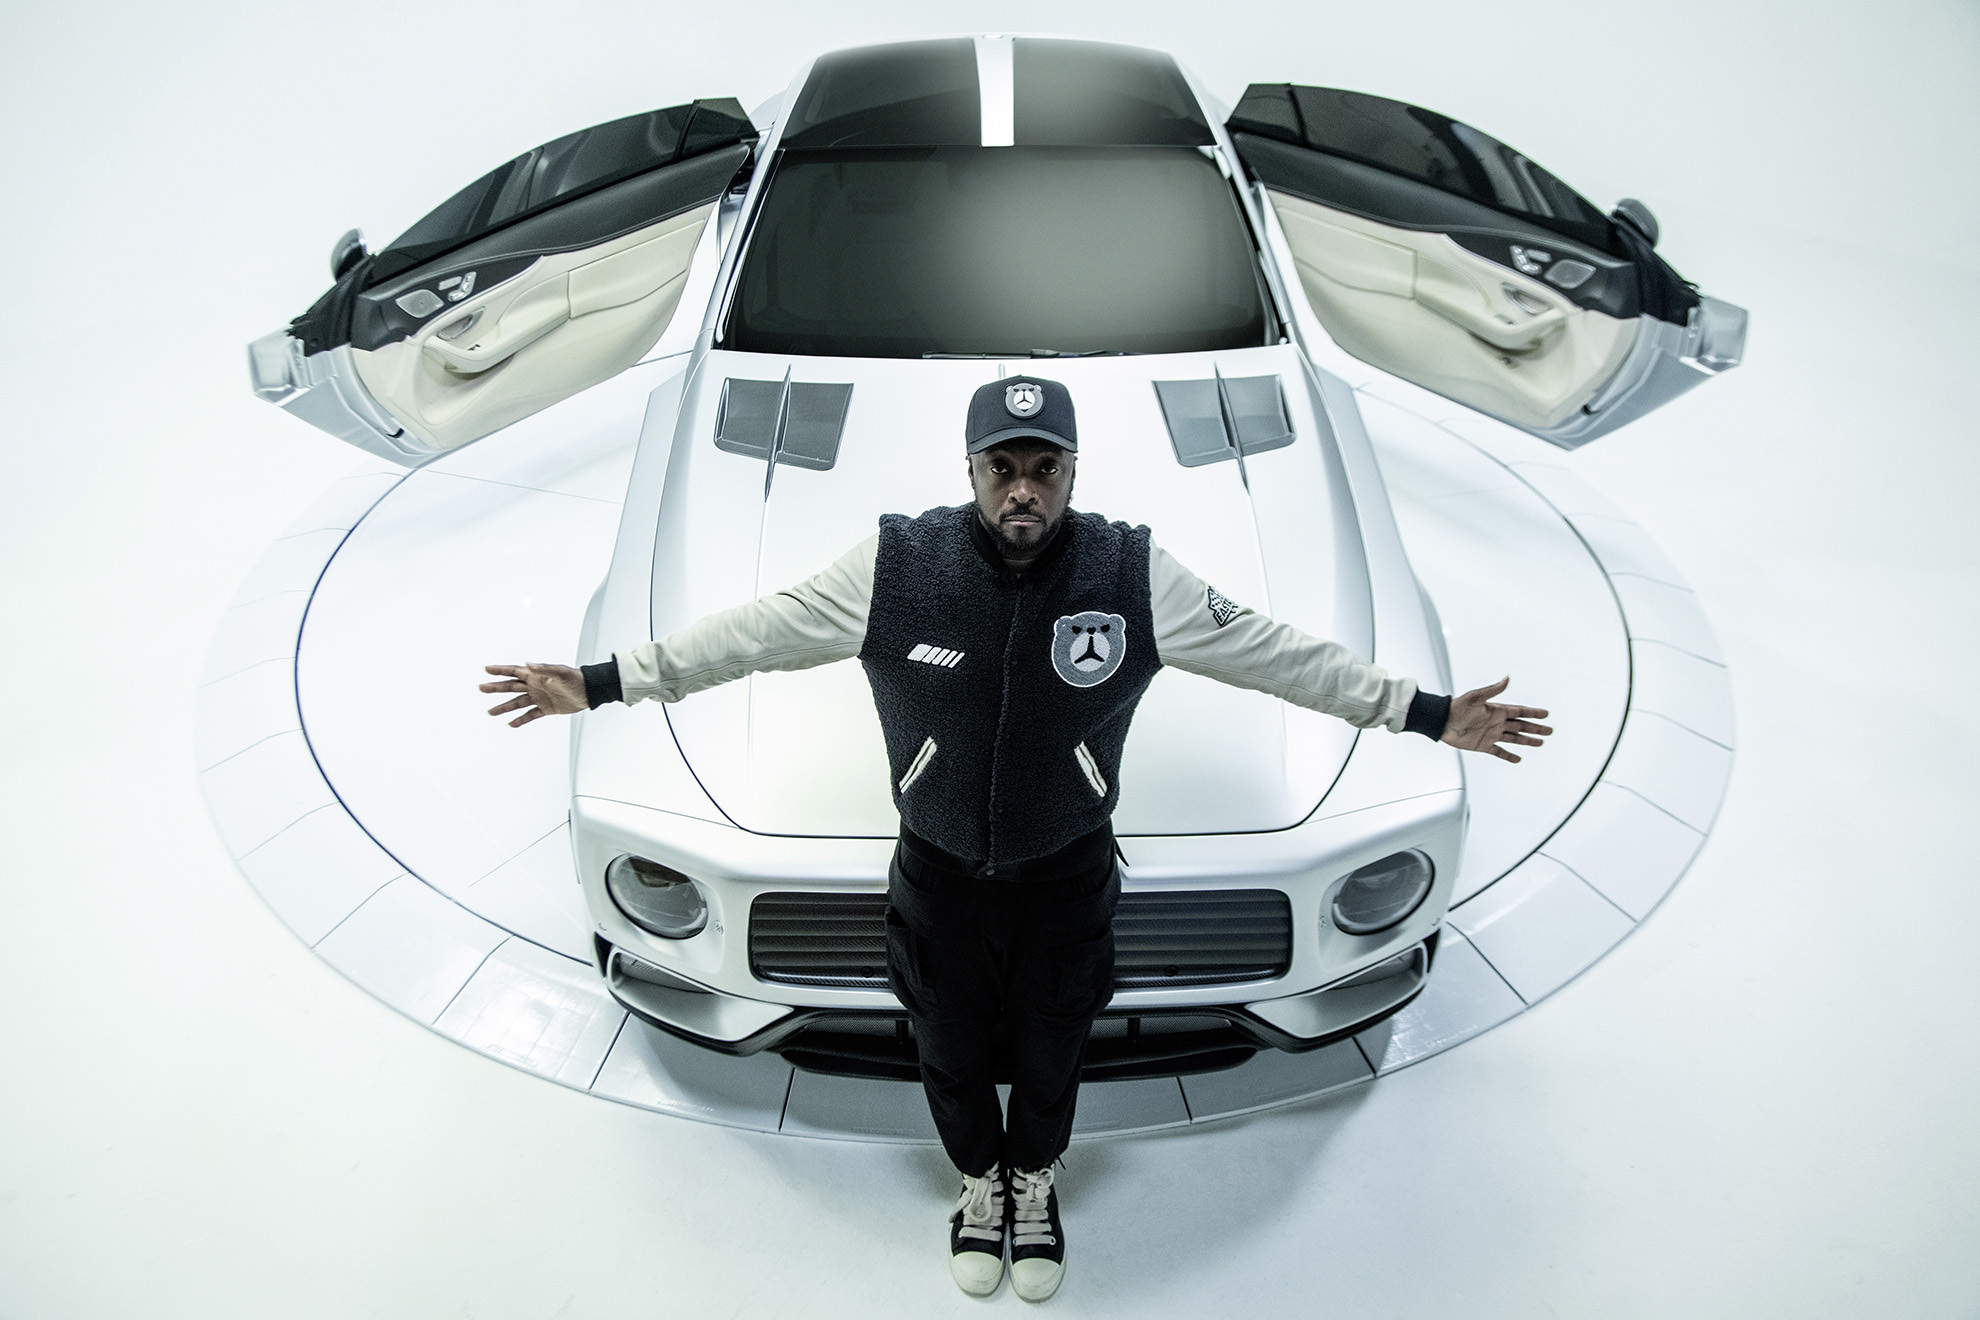 will.i.am - Mercedes Benz - will.i.amg - one off - AMG GT Coupe - SLS - Clase G - West Coast Customs